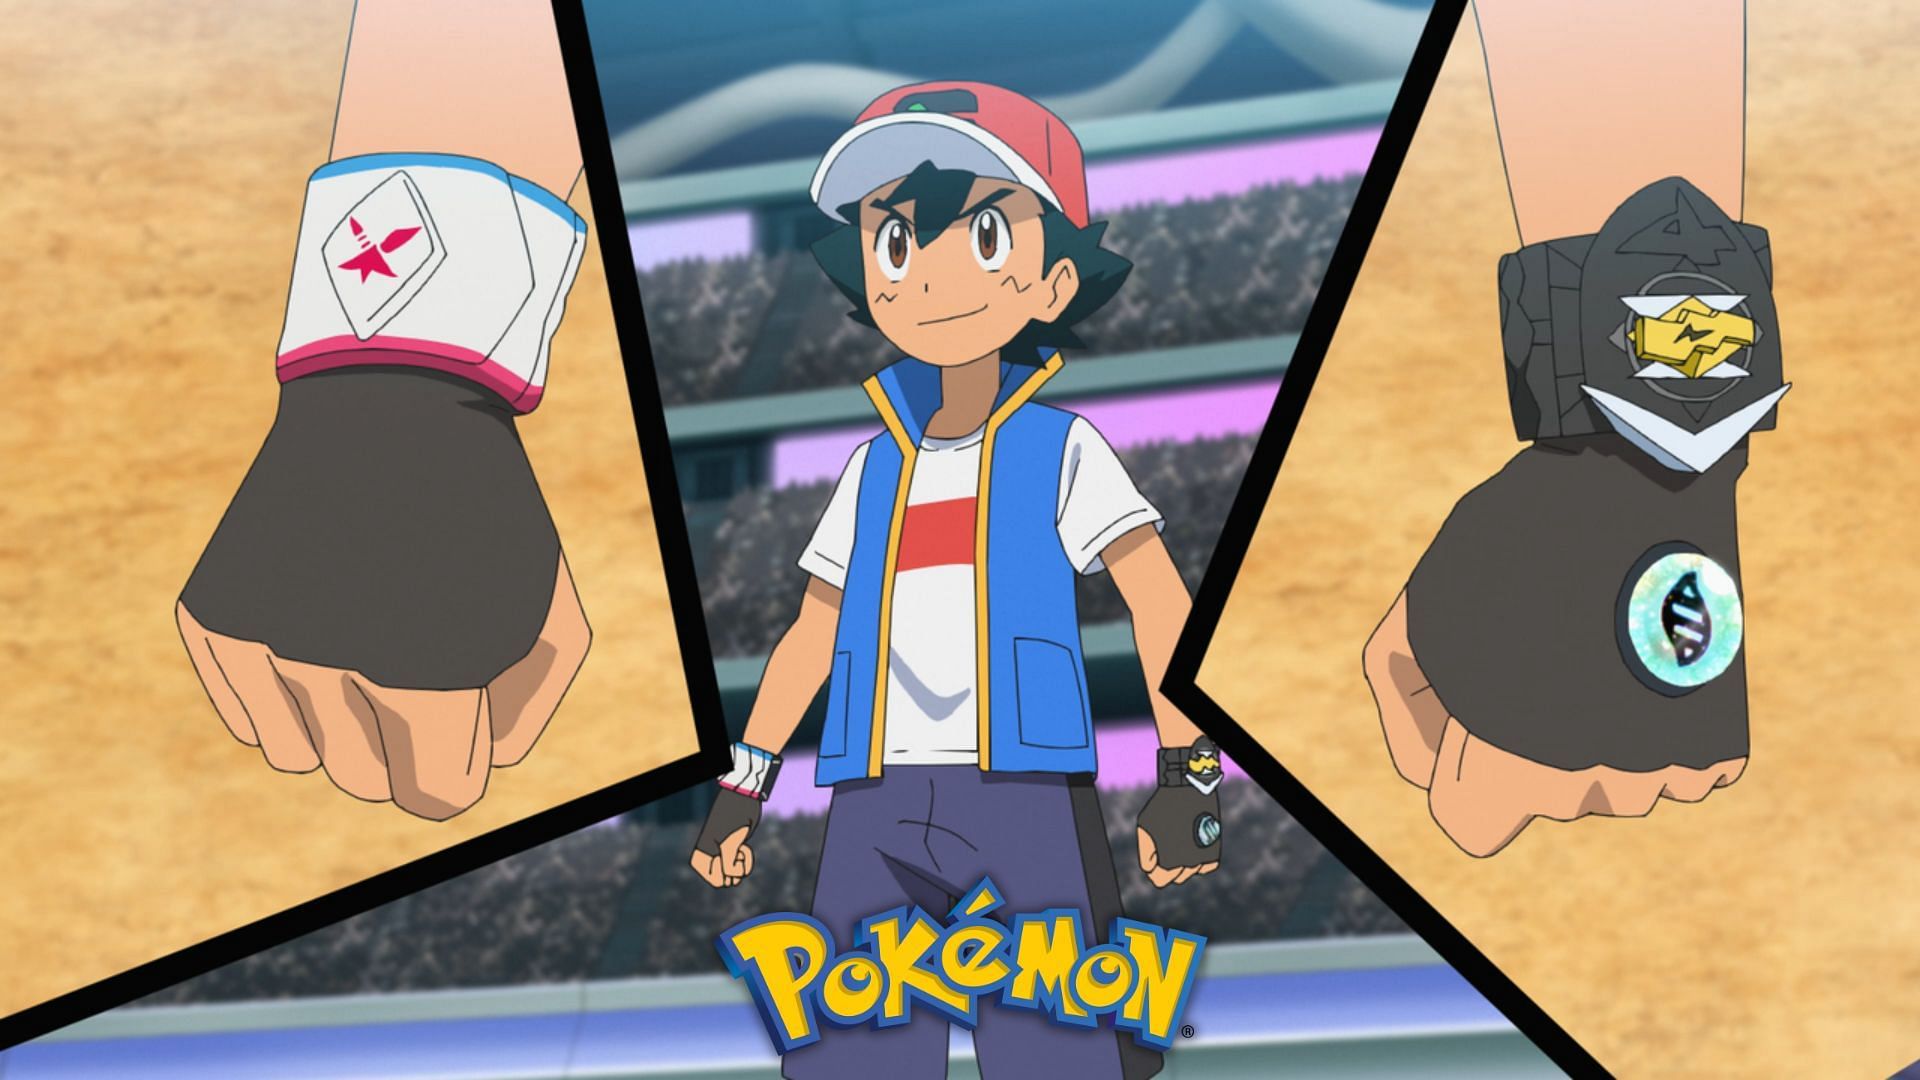 5 new Pokemon Battle Gimmicks we would love to see